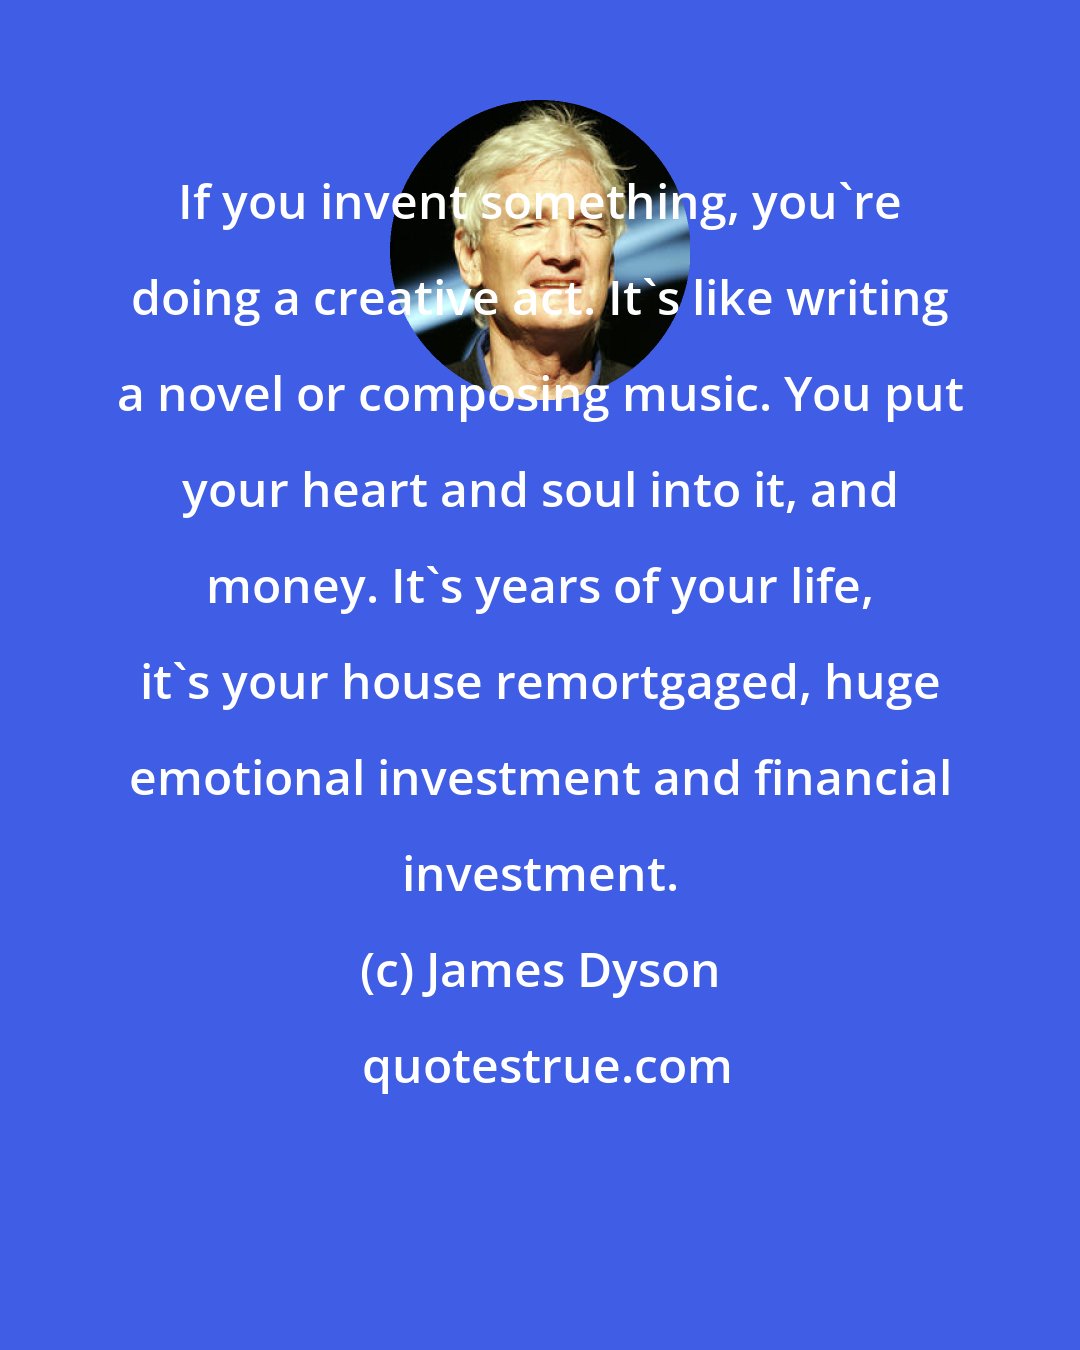 James Dyson: If you invent something, you're doing a creative act. It's like writing a novel or composing music. You put your heart and soul into it, and money. It's years of your life, it's your house remortgaged, huge emotional investment and financial investment.